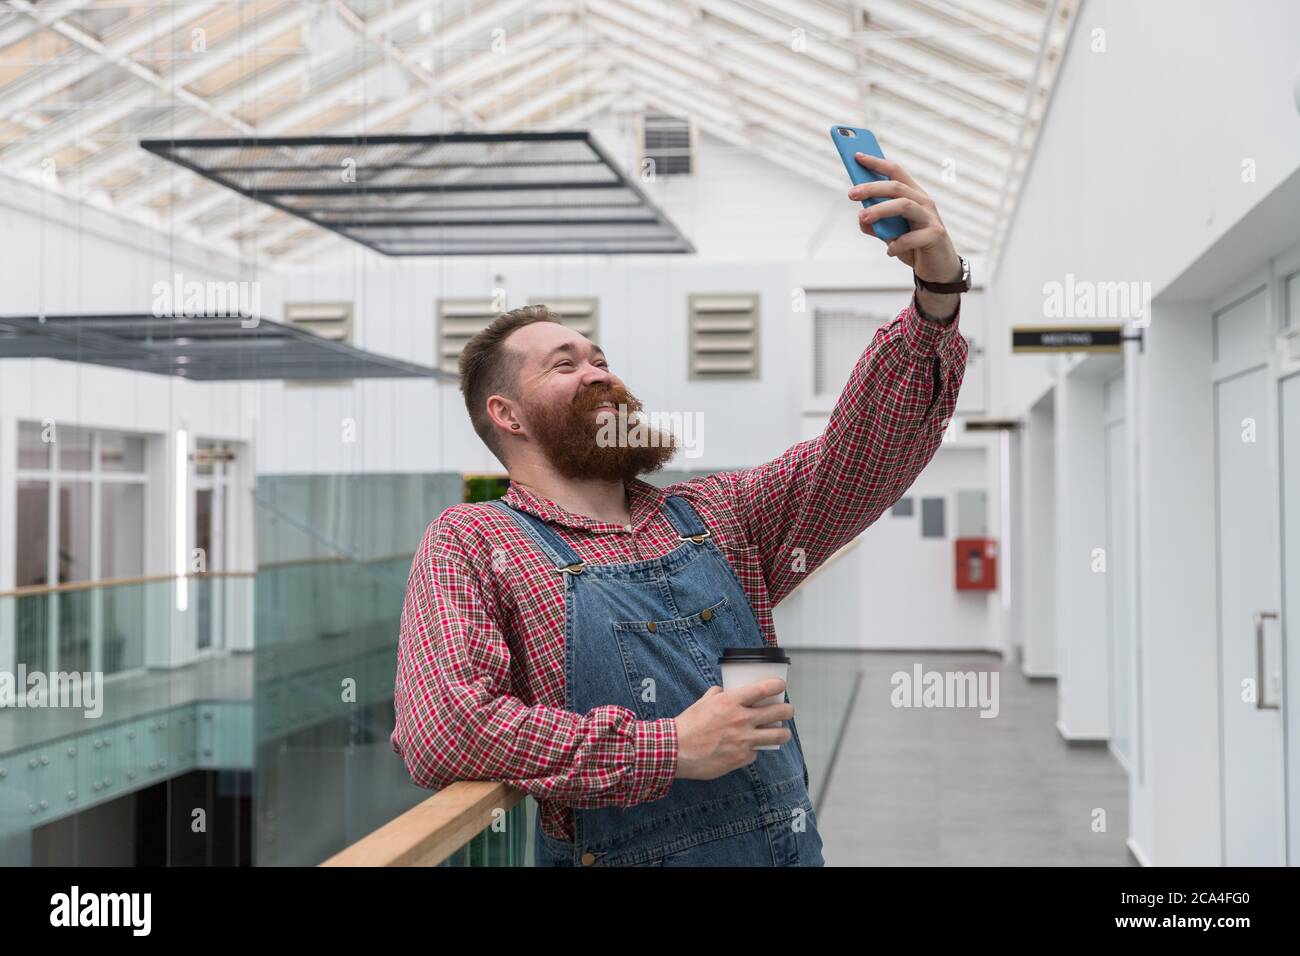 Smiling bearded barber worker in blue overalls, checked shirt, drinking coffee from a paper cup, talking on a video call or taking a selfie on smartph Stock Photo